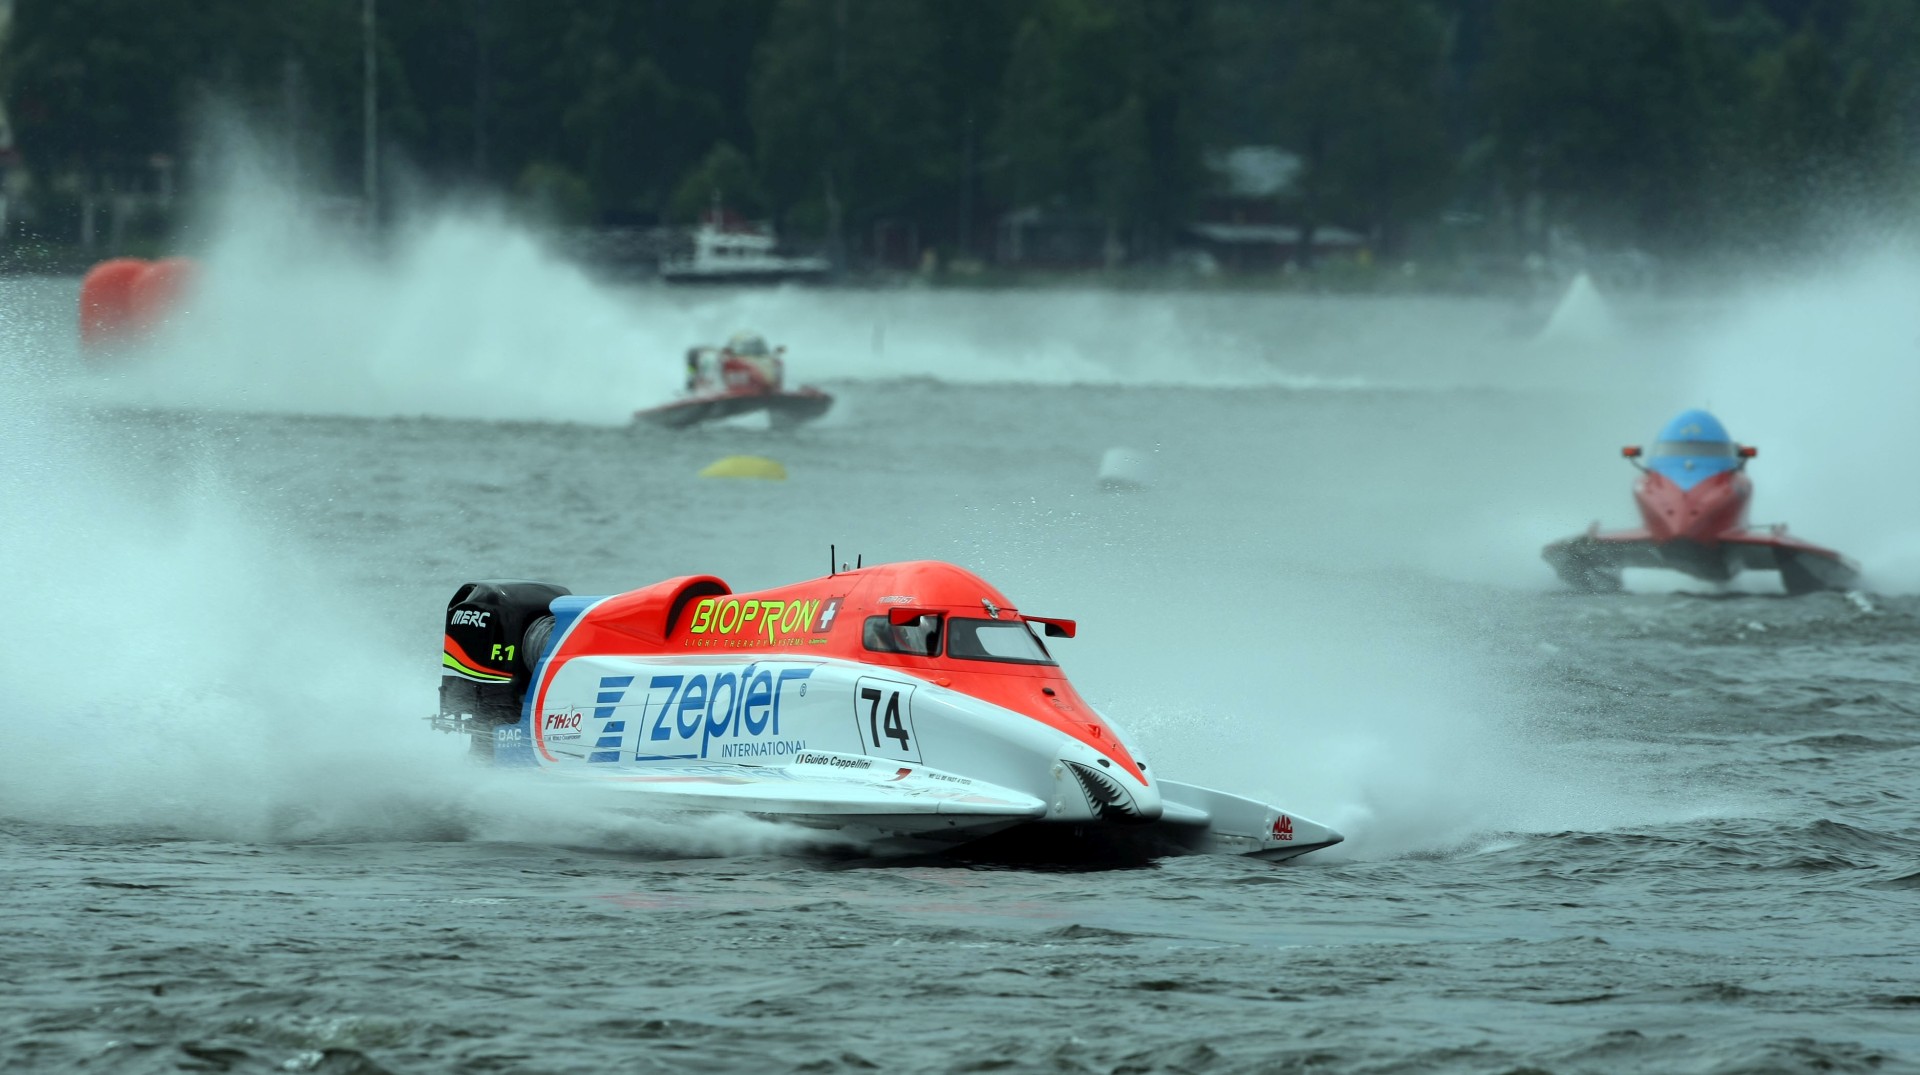 120609-LAHTI-PL-Guido Cappellini of Italy of the Zepter Team in action during the 1st race of the UIM F1 Powerboat Grand Prix of Finland, on Lake Vesijarvi, Lahti, Finland. Picture by Paul Lakatos/Idea Marketing.